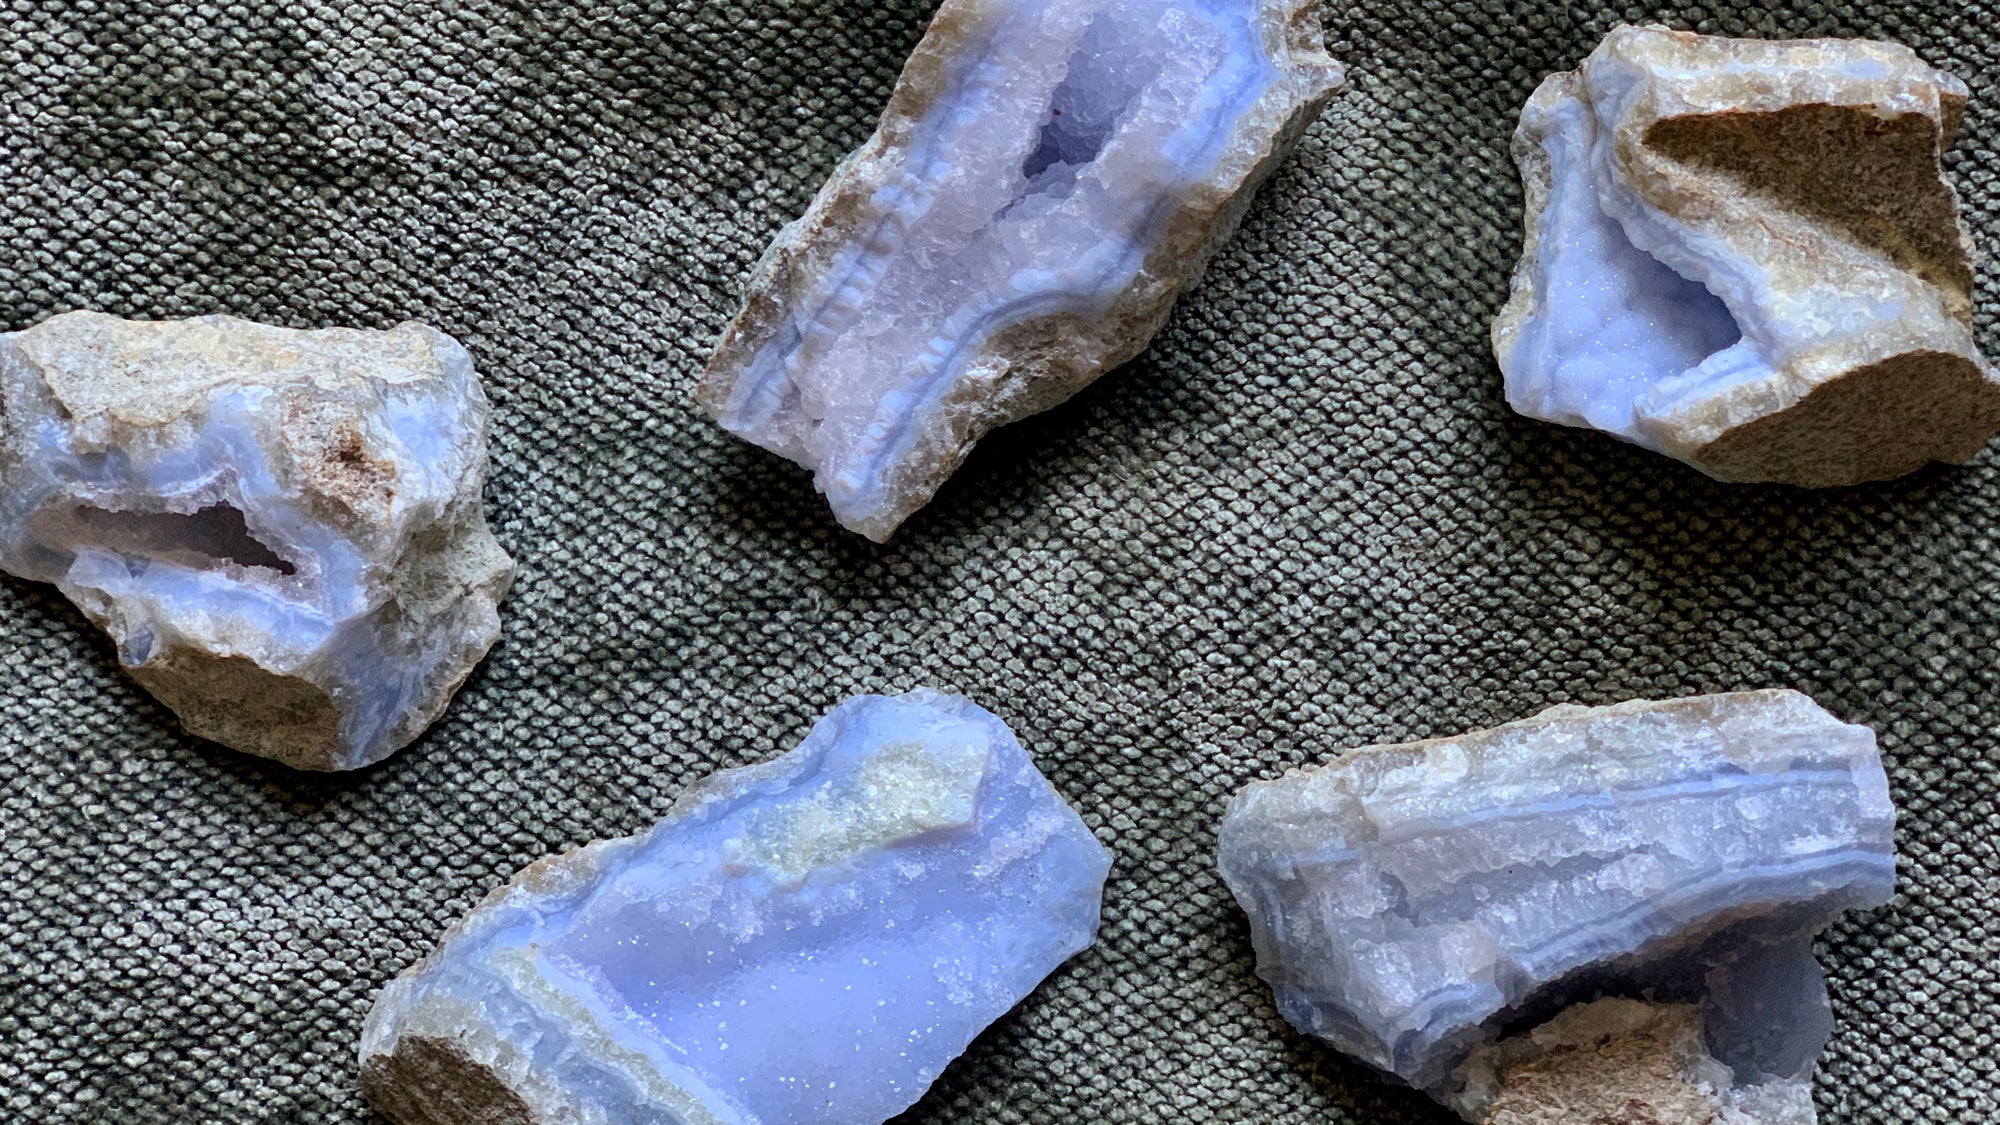 Blue Lace Agate Blue Chalcedony Raw Natural Crystals Gemstones Healing Rocks Metaphysical Benefits